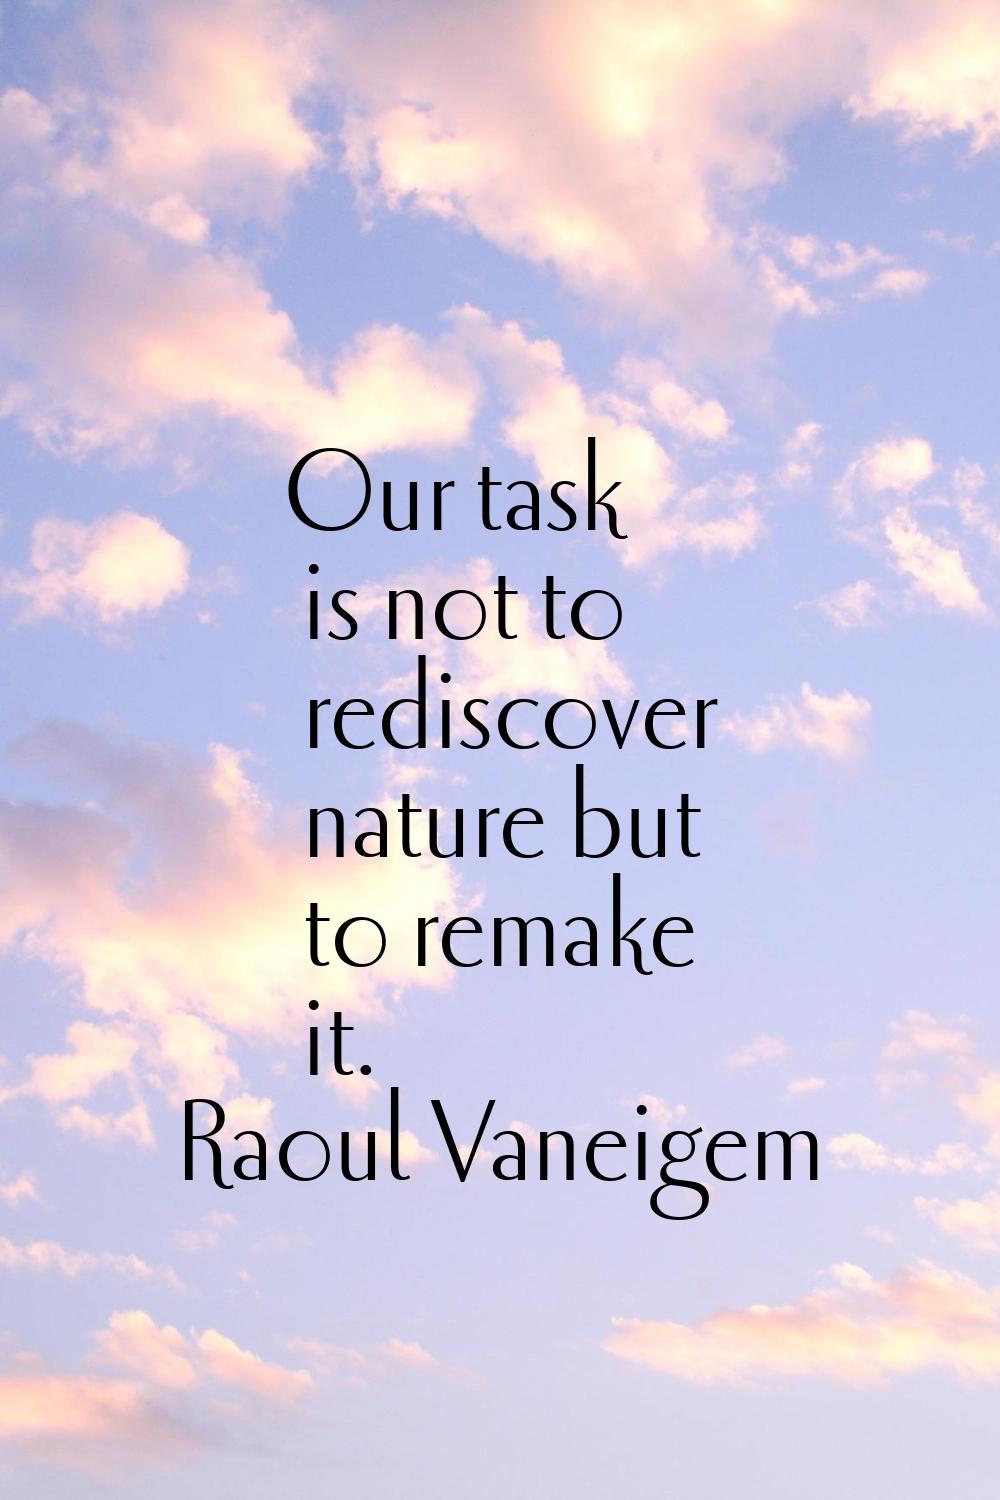 Our task is not to rediscover nature but to remake it.